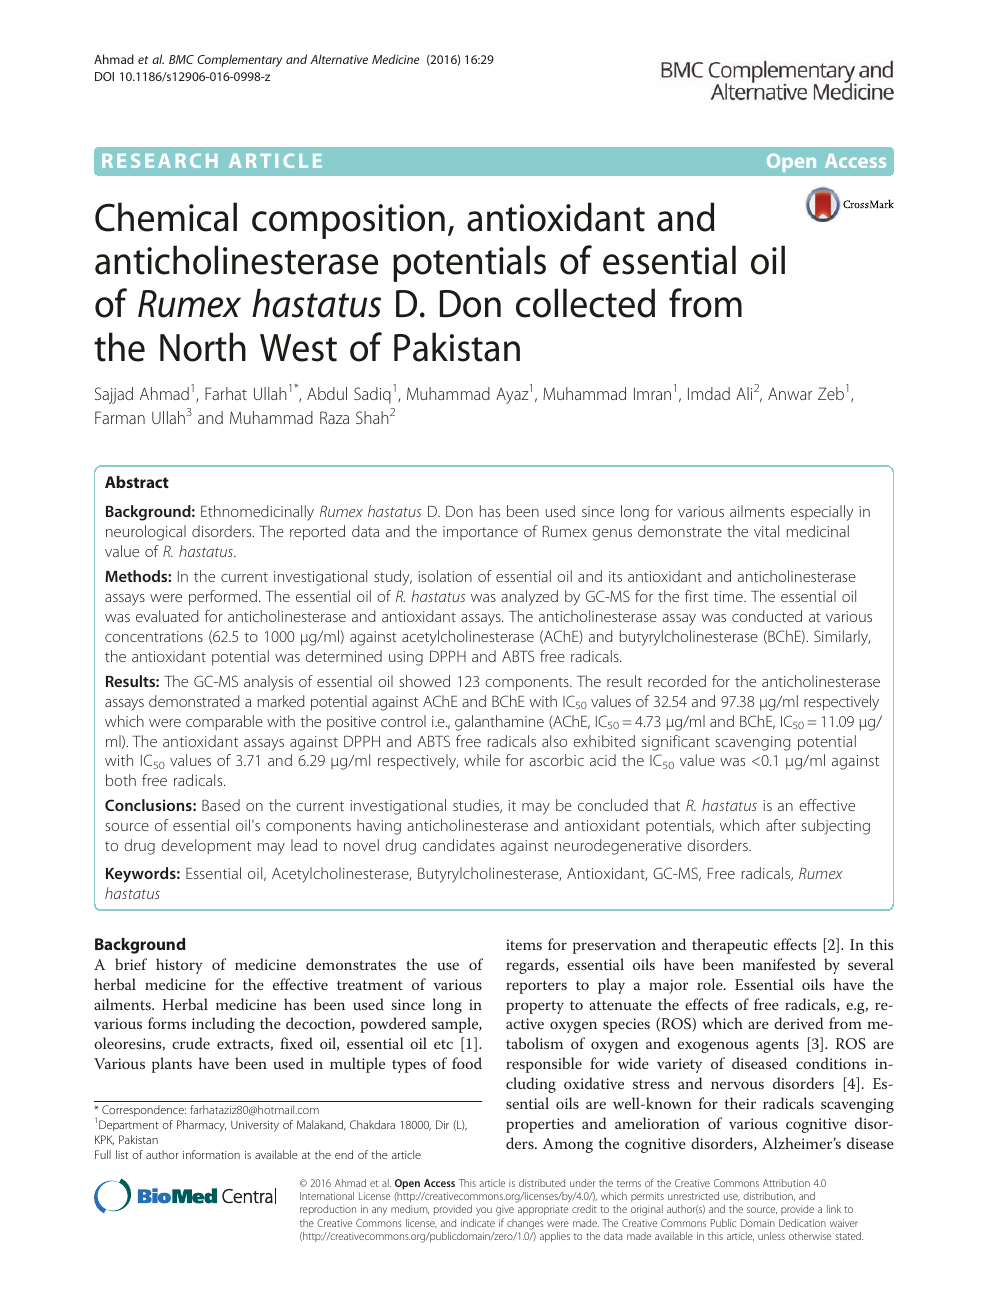 časopis Kuća na cesti Prilagoditi se  Chemical composition, antioxidant and anticholinesterase potentials of  essential oil of Rumex hastatus D. Don collected from the North West of  Pakistan – topic of research paper in Chemical sciences. Download scholarly  article